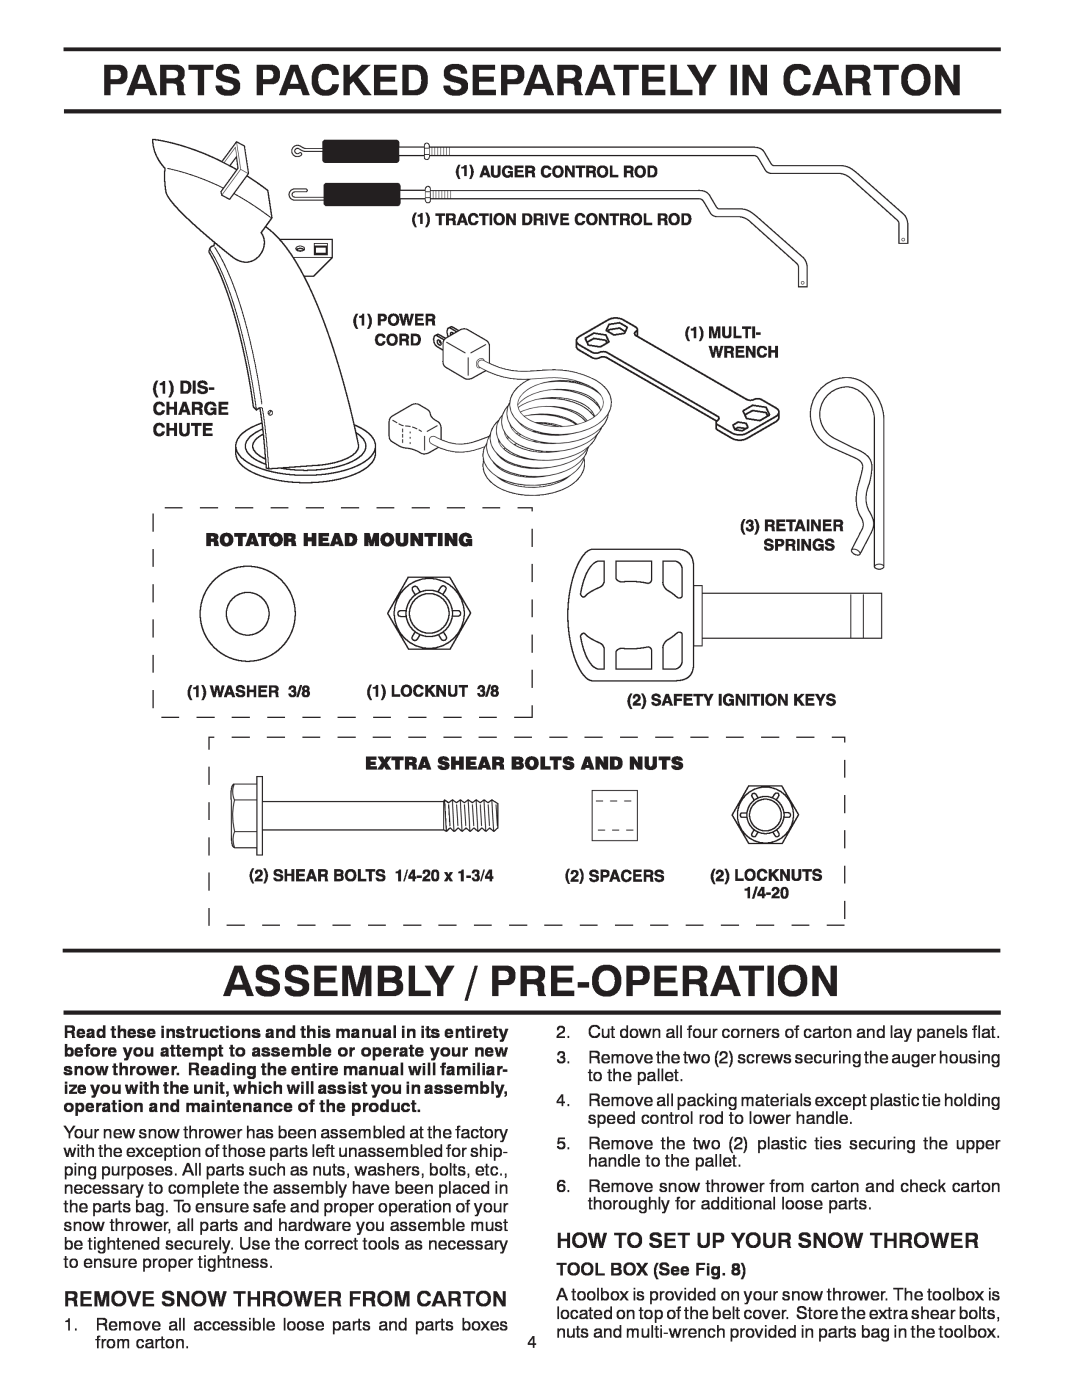 Poulan 416829 owner manual Parts Packed Separately In Carton, Assembly / Pre-Operation, How To Set Up Your Snow Thrower 